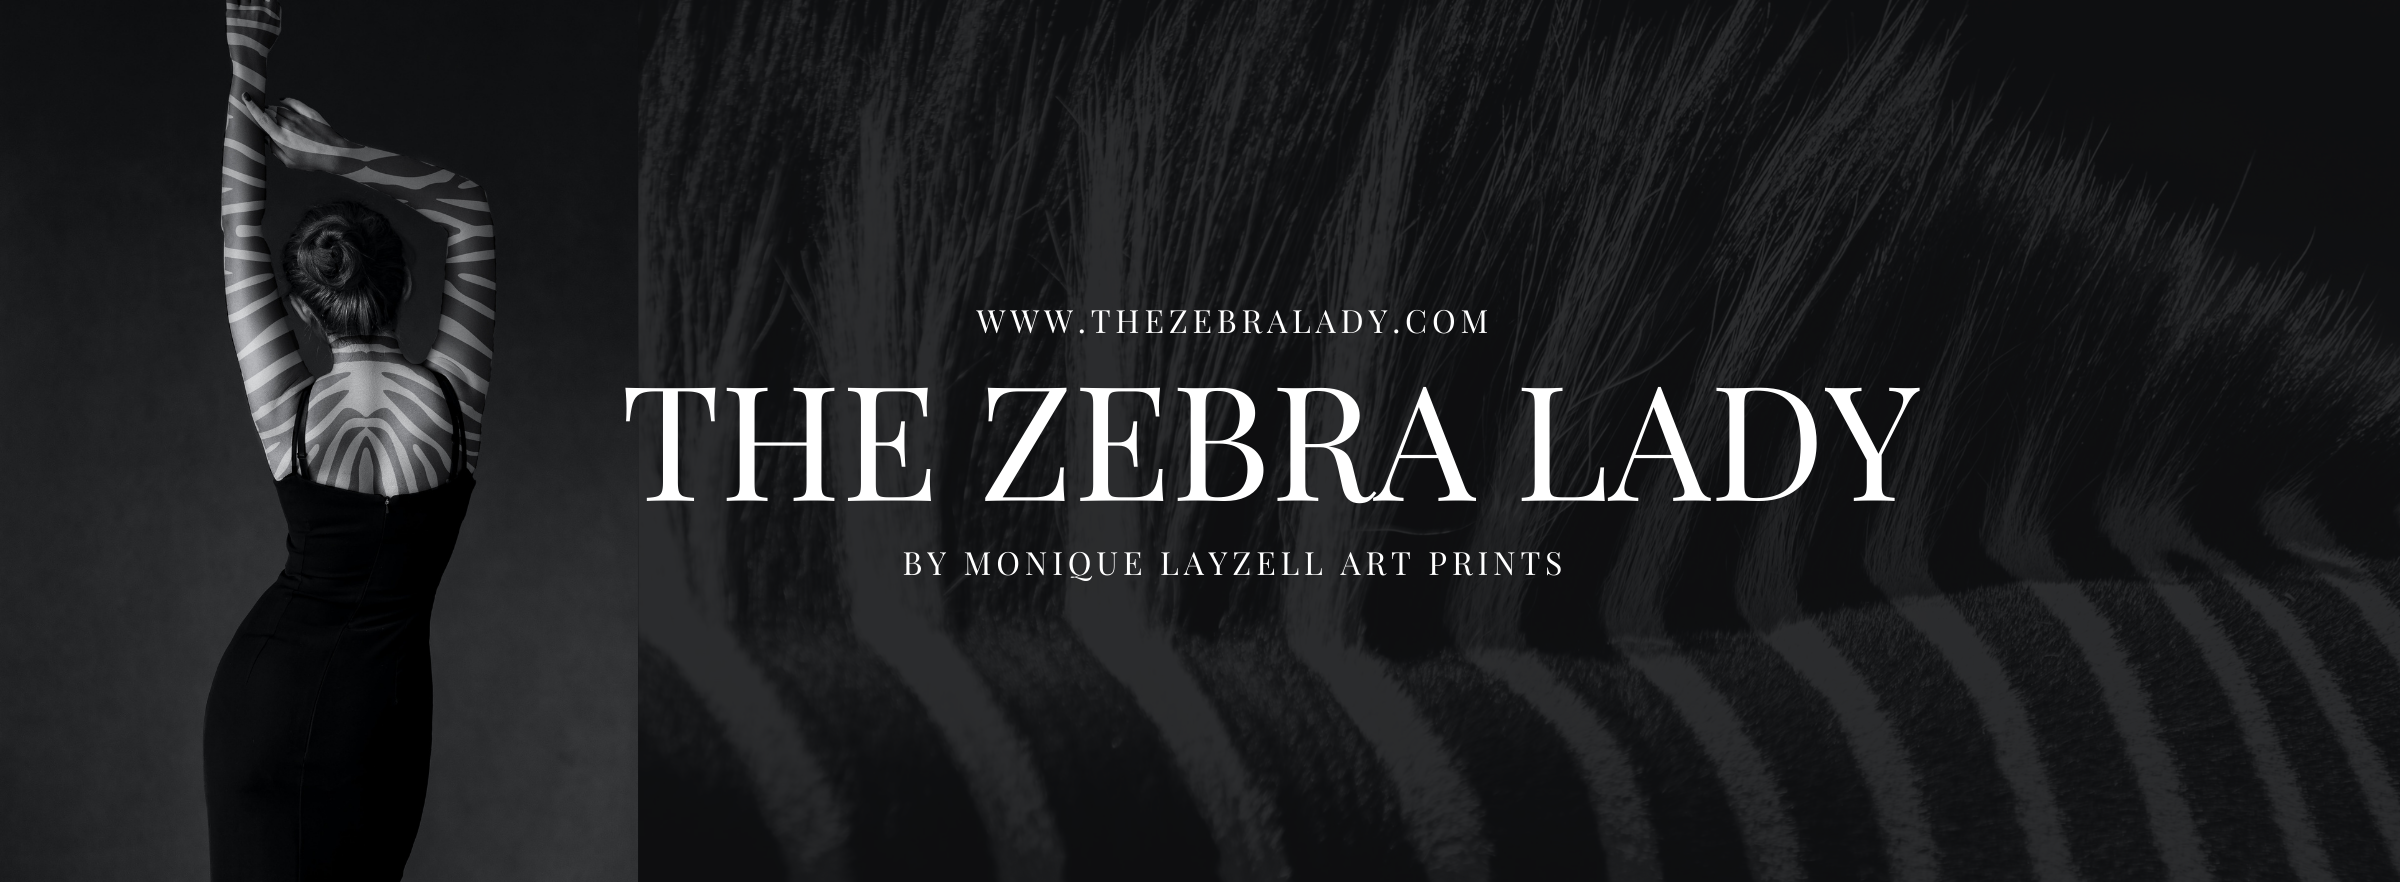 The Zebra lady by Monique layzell Shop for the unique  www.thezebralady.com (1).png